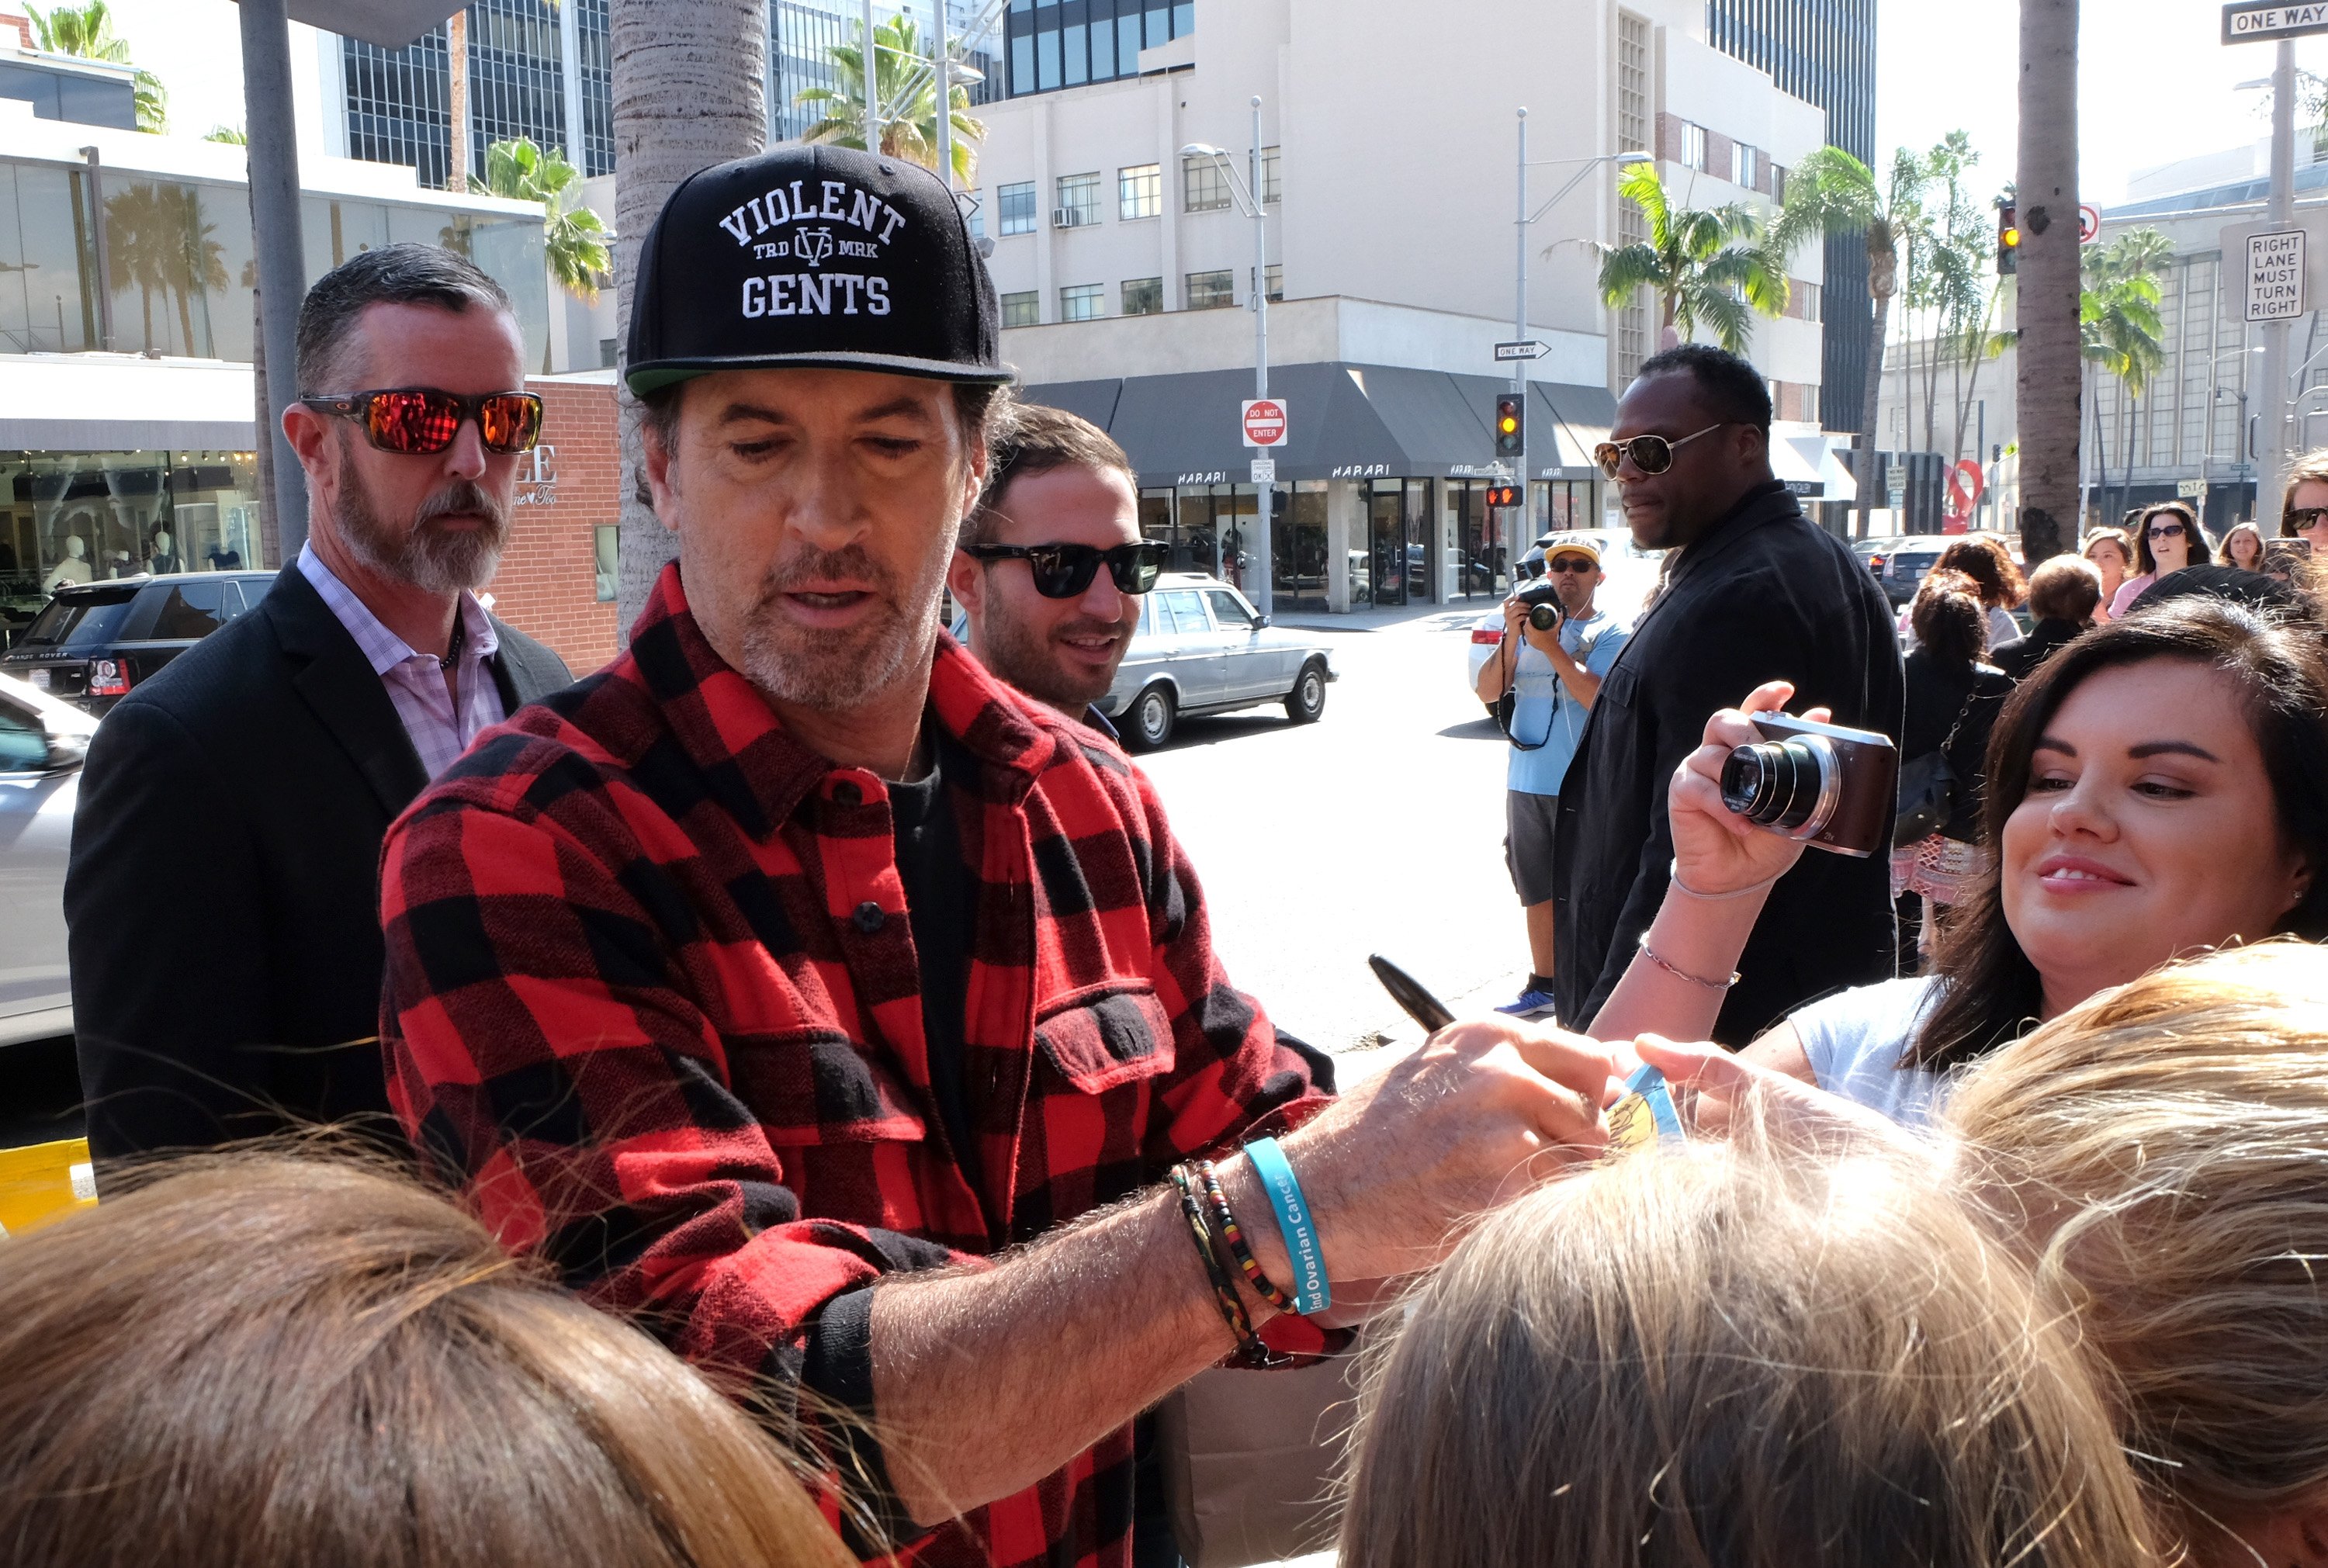 Scott Patterson signs autographs during a 'Gilmore Girls' pop-up event in 2016